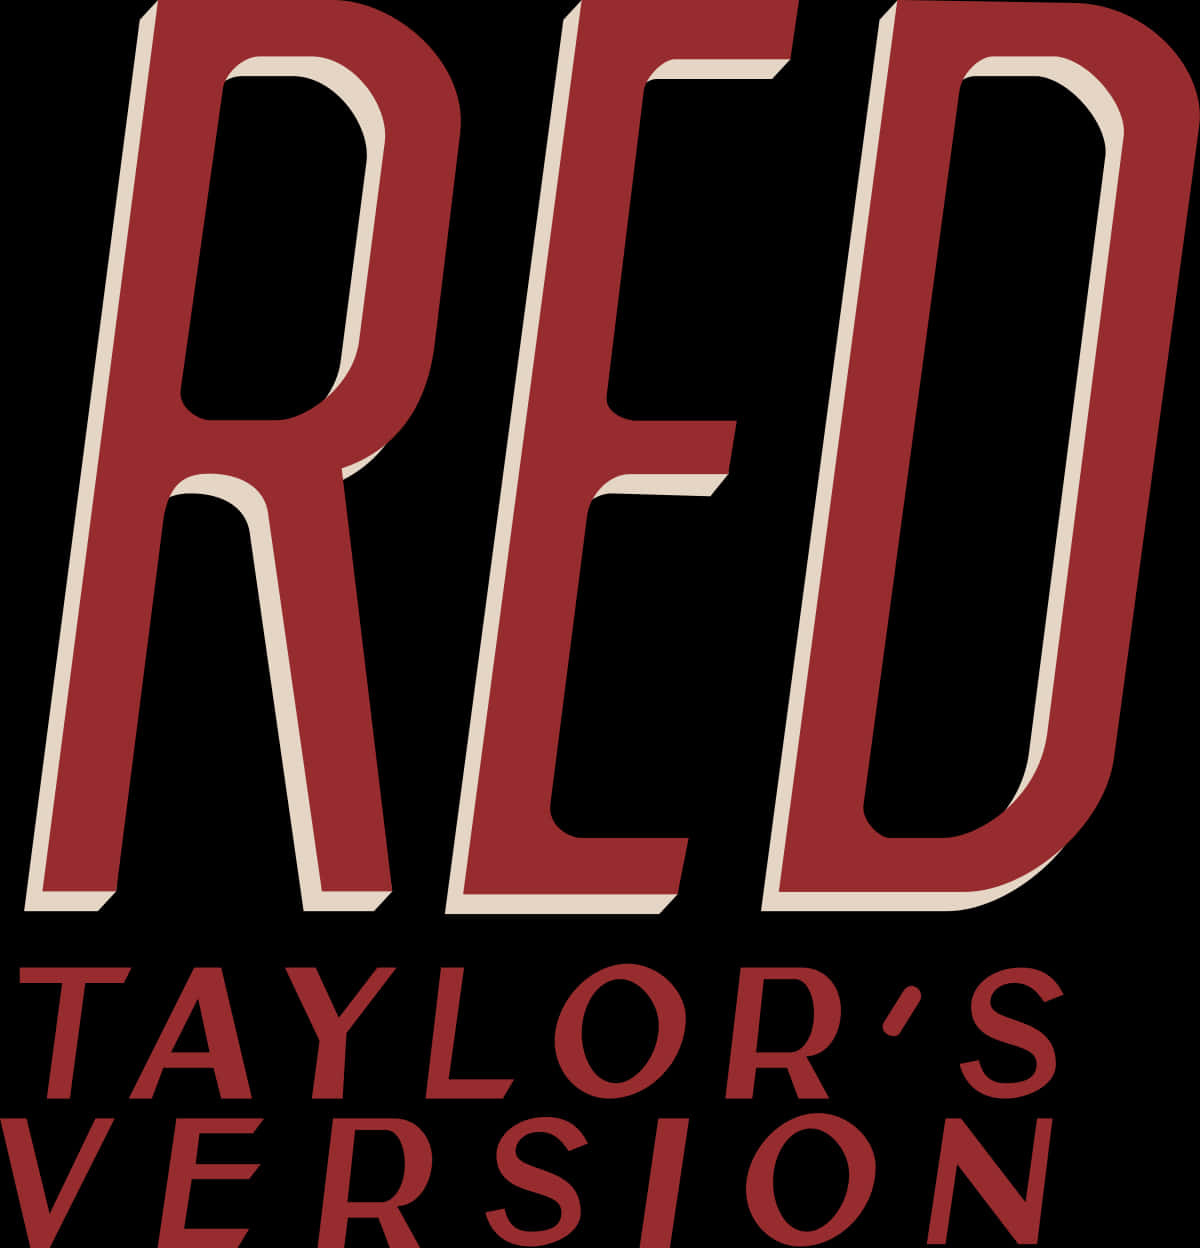 All eyes on Taylor Swift in her magnificent Red Taylors Version. Wallpaper